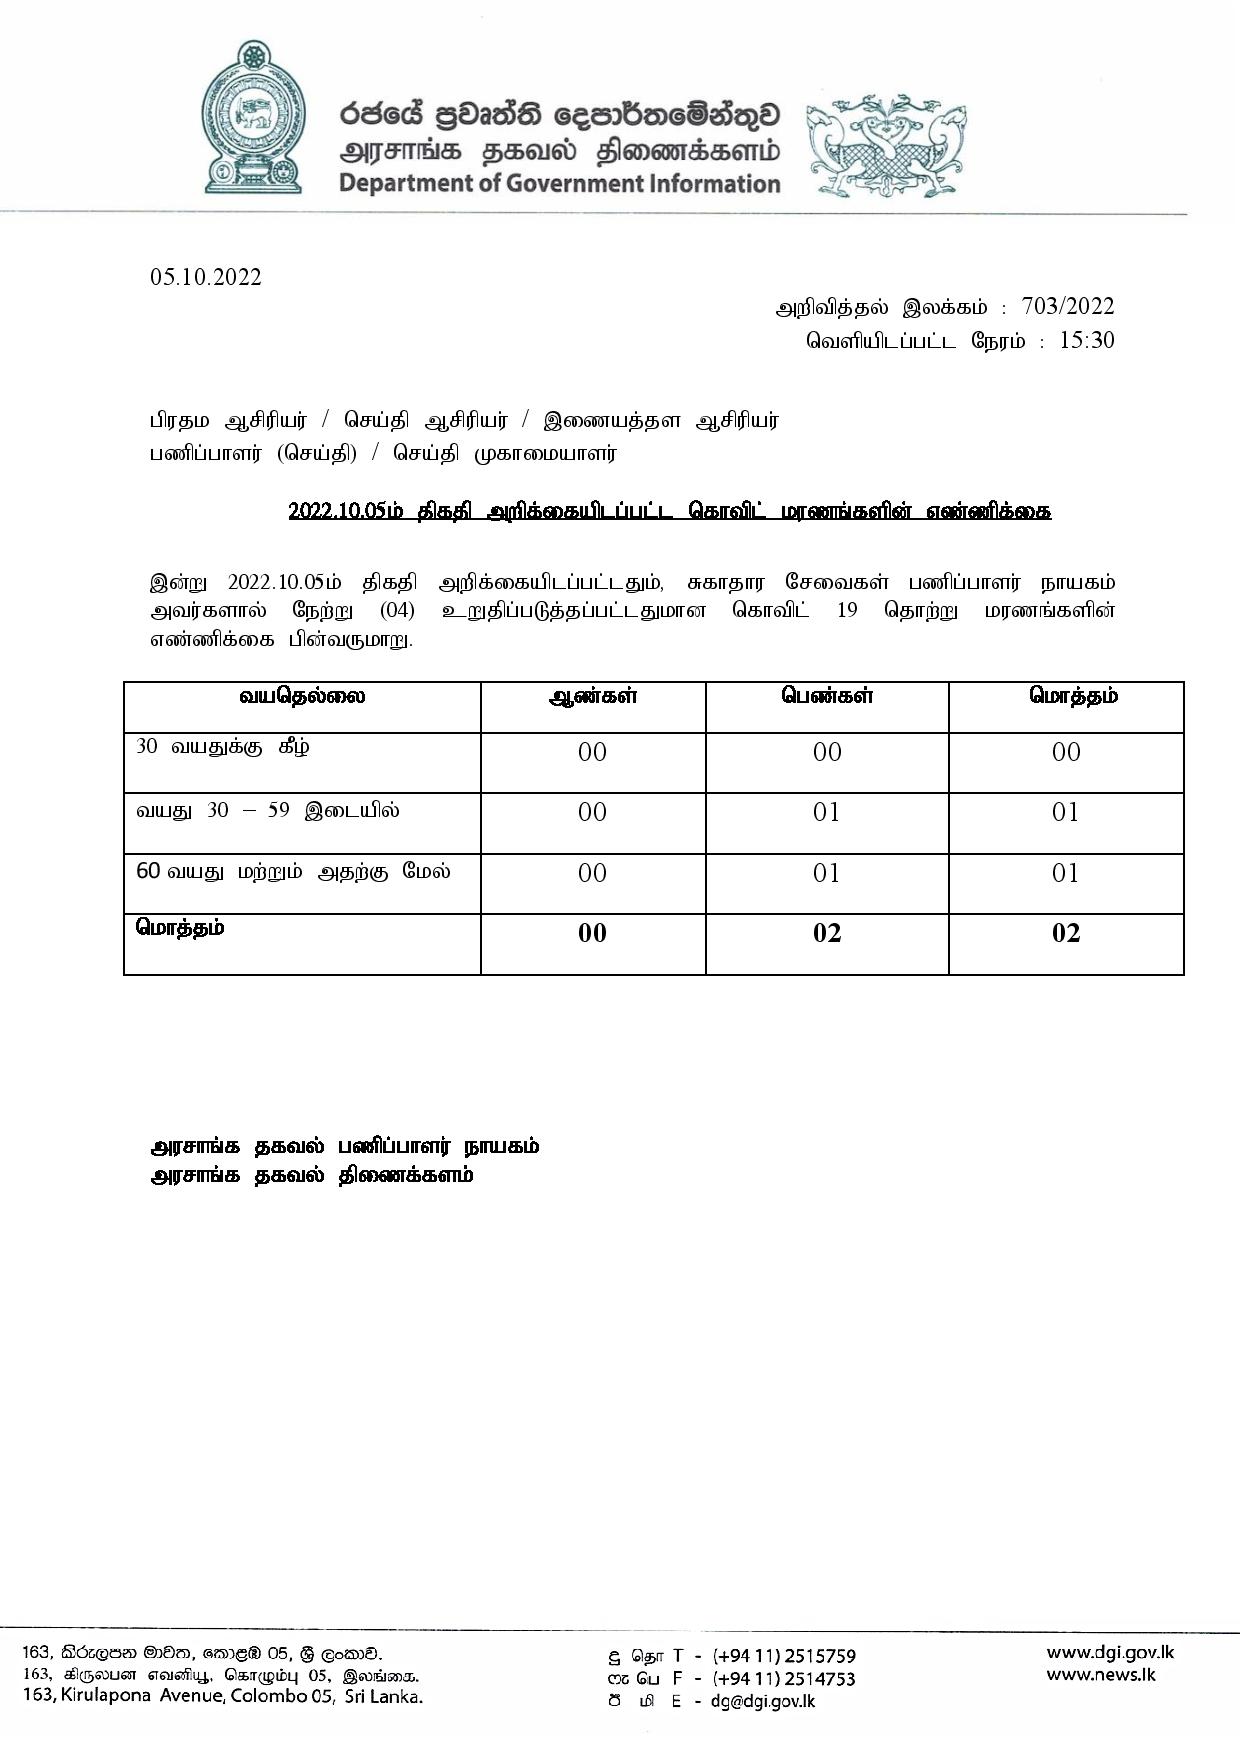 Relase No 703 Tamil page 001